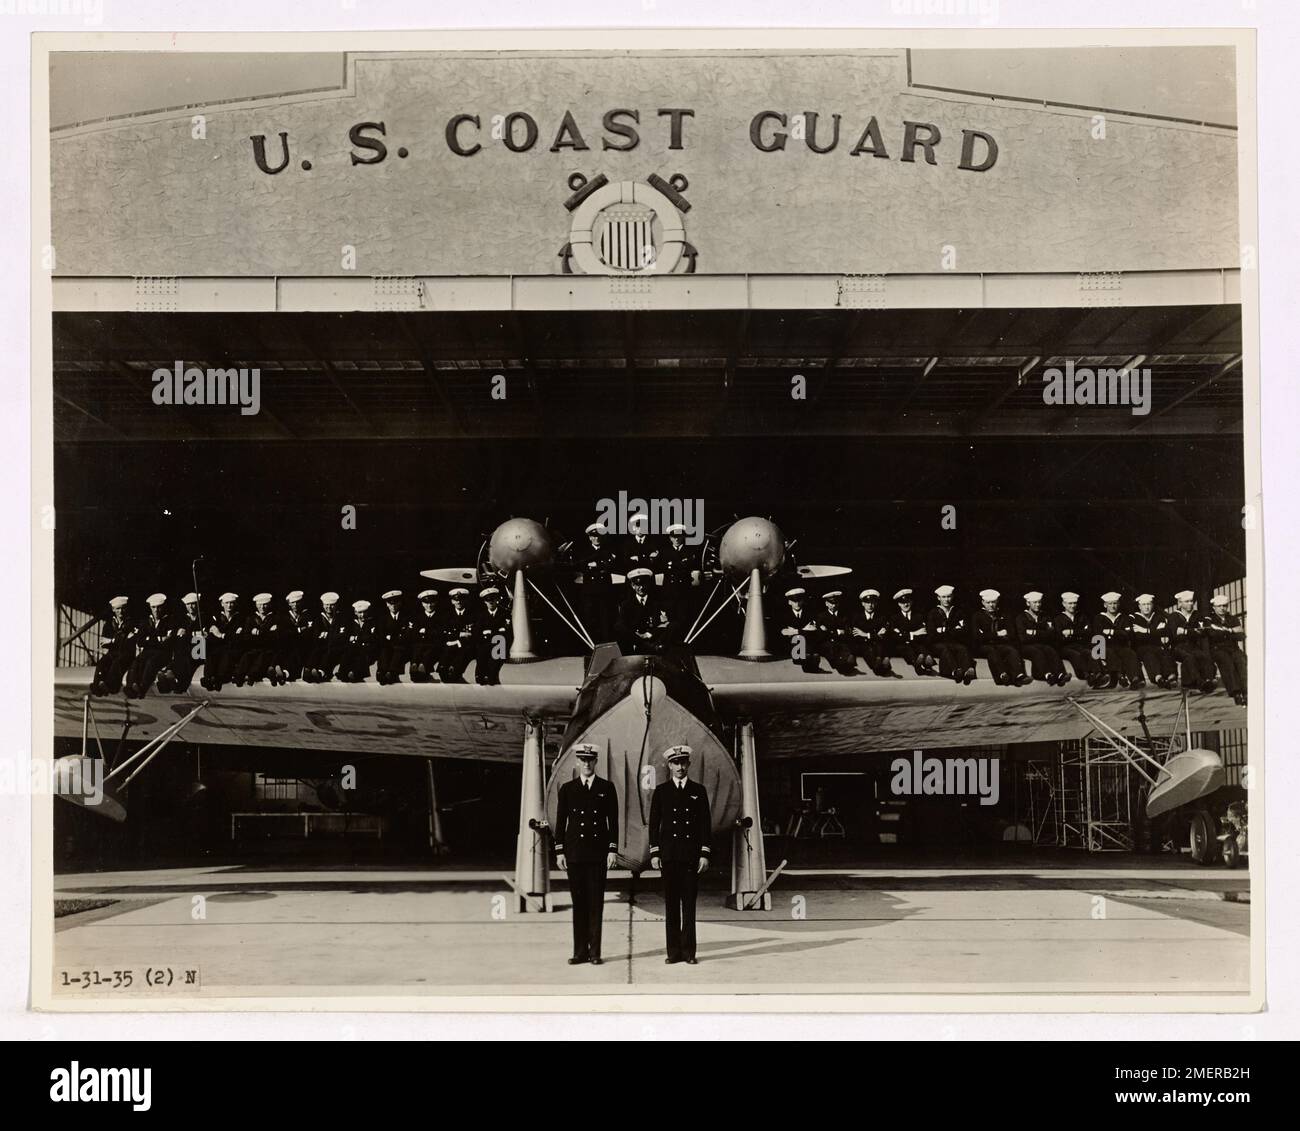 Miami Air Station, General Muster. This image depicts General Muster, Miami Air Station, Lieutenant C. B. Olsen, Commanding. Stock Photo